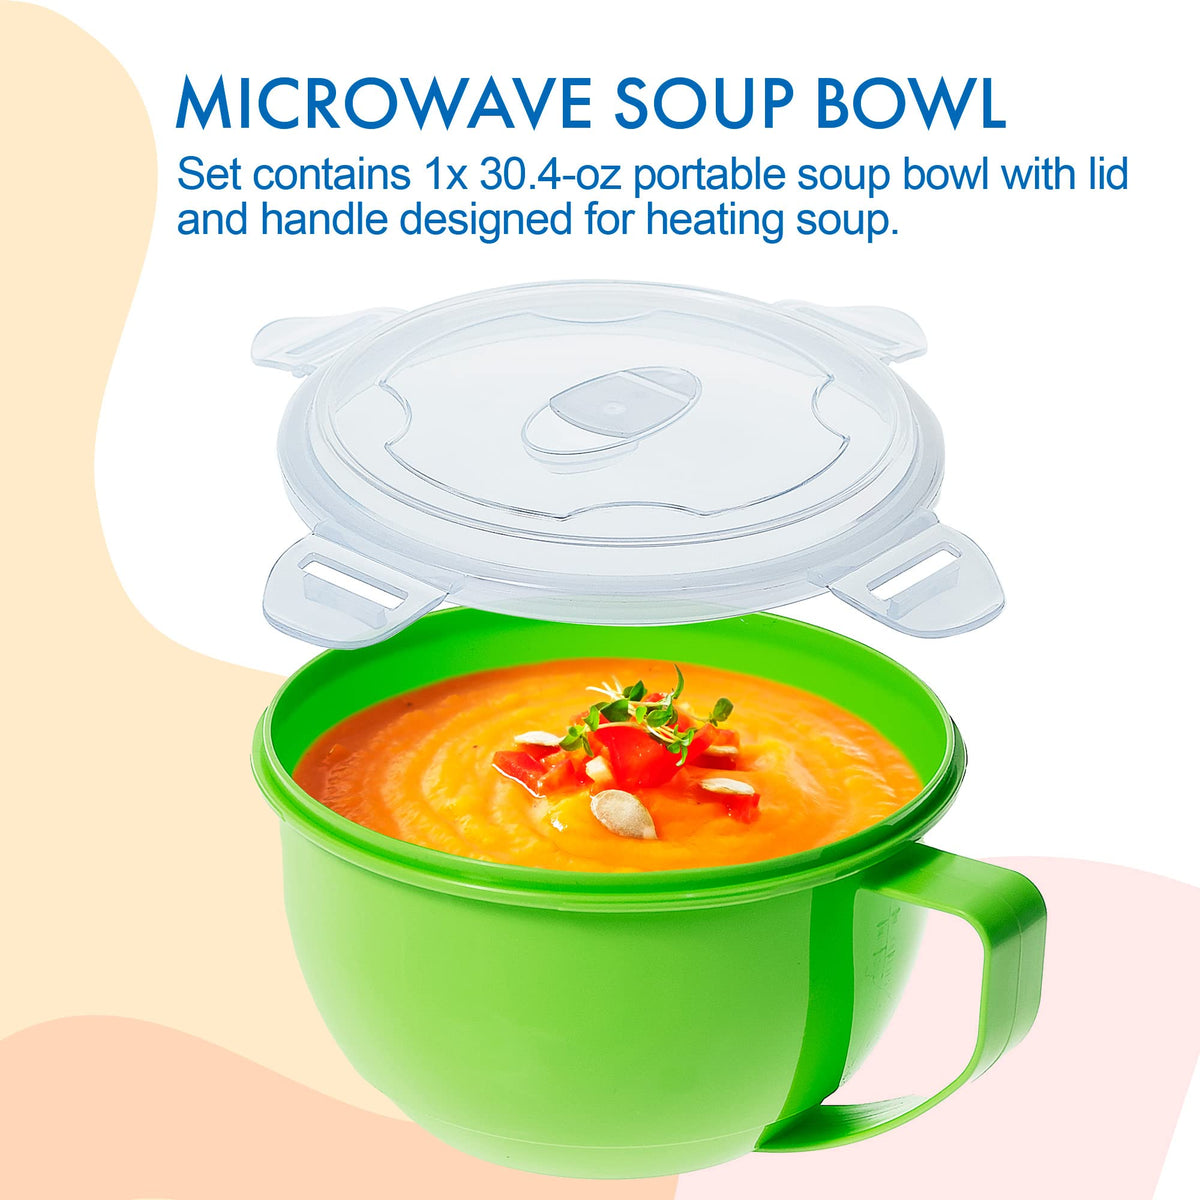 MATICAN Microwave Bowl with Lid, 2-Pack Microwave Soup Bowl with Lid